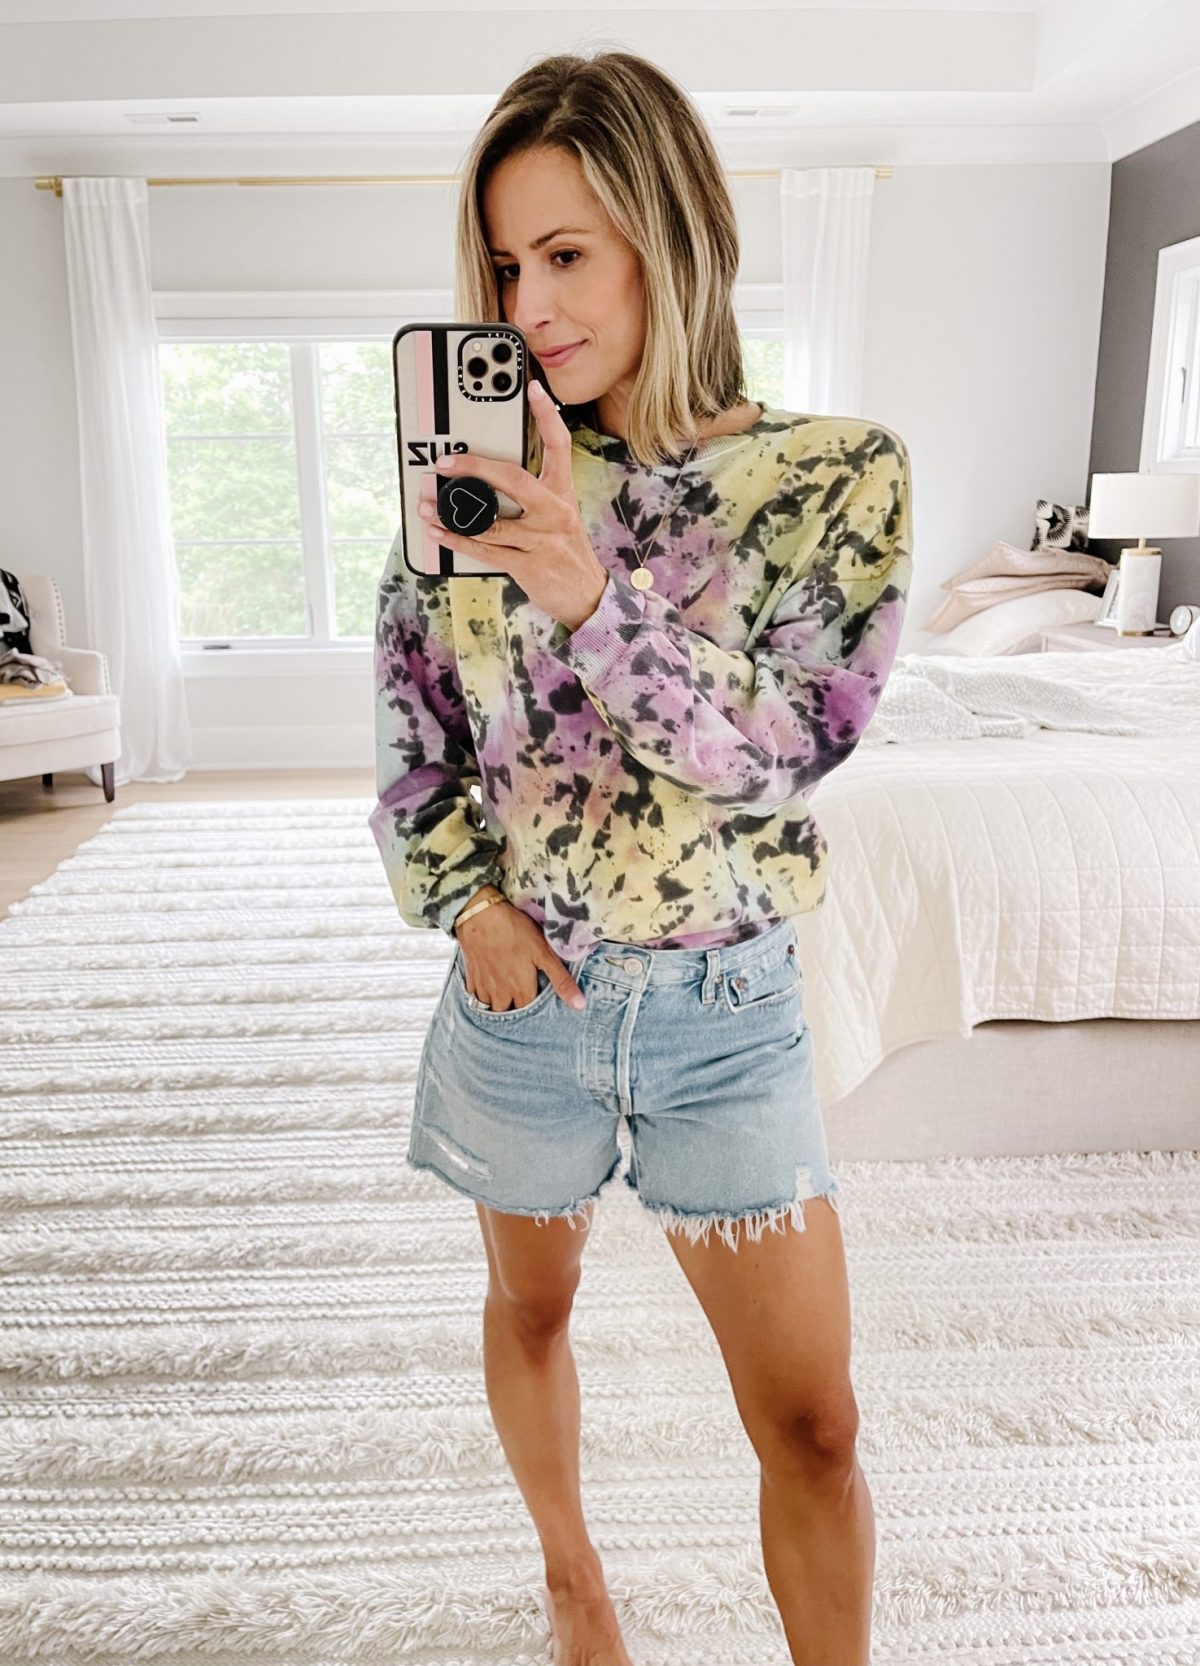 Summer to fall style: tie dye sweatshirt and cut offs